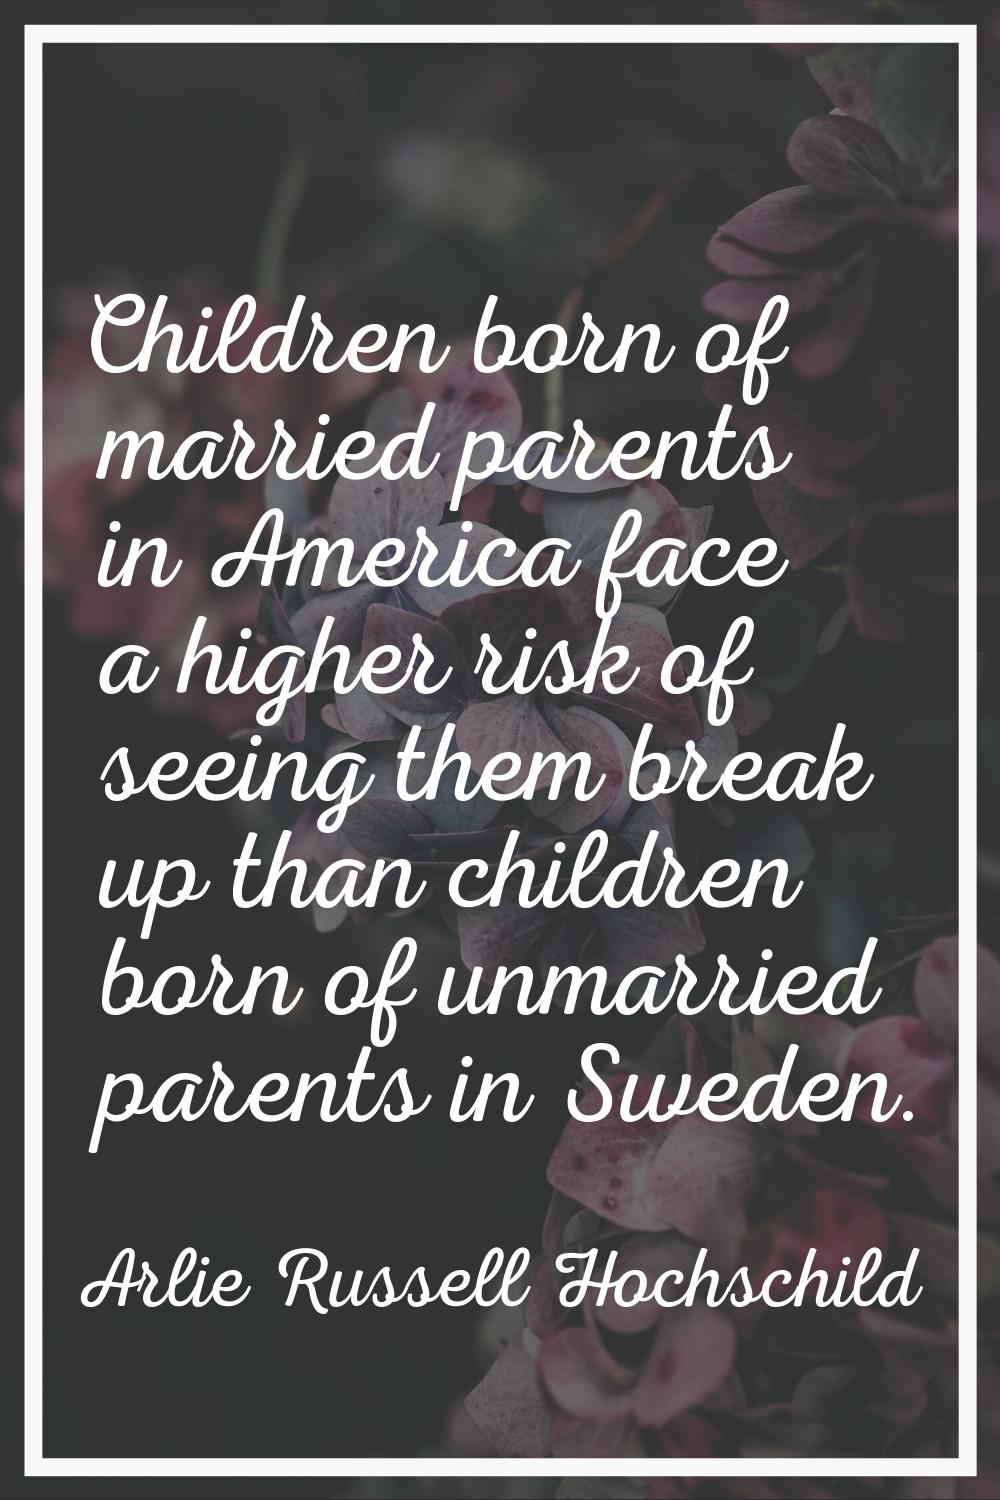 Children born of married parents in America face a higher risk of seeing them break up than childre